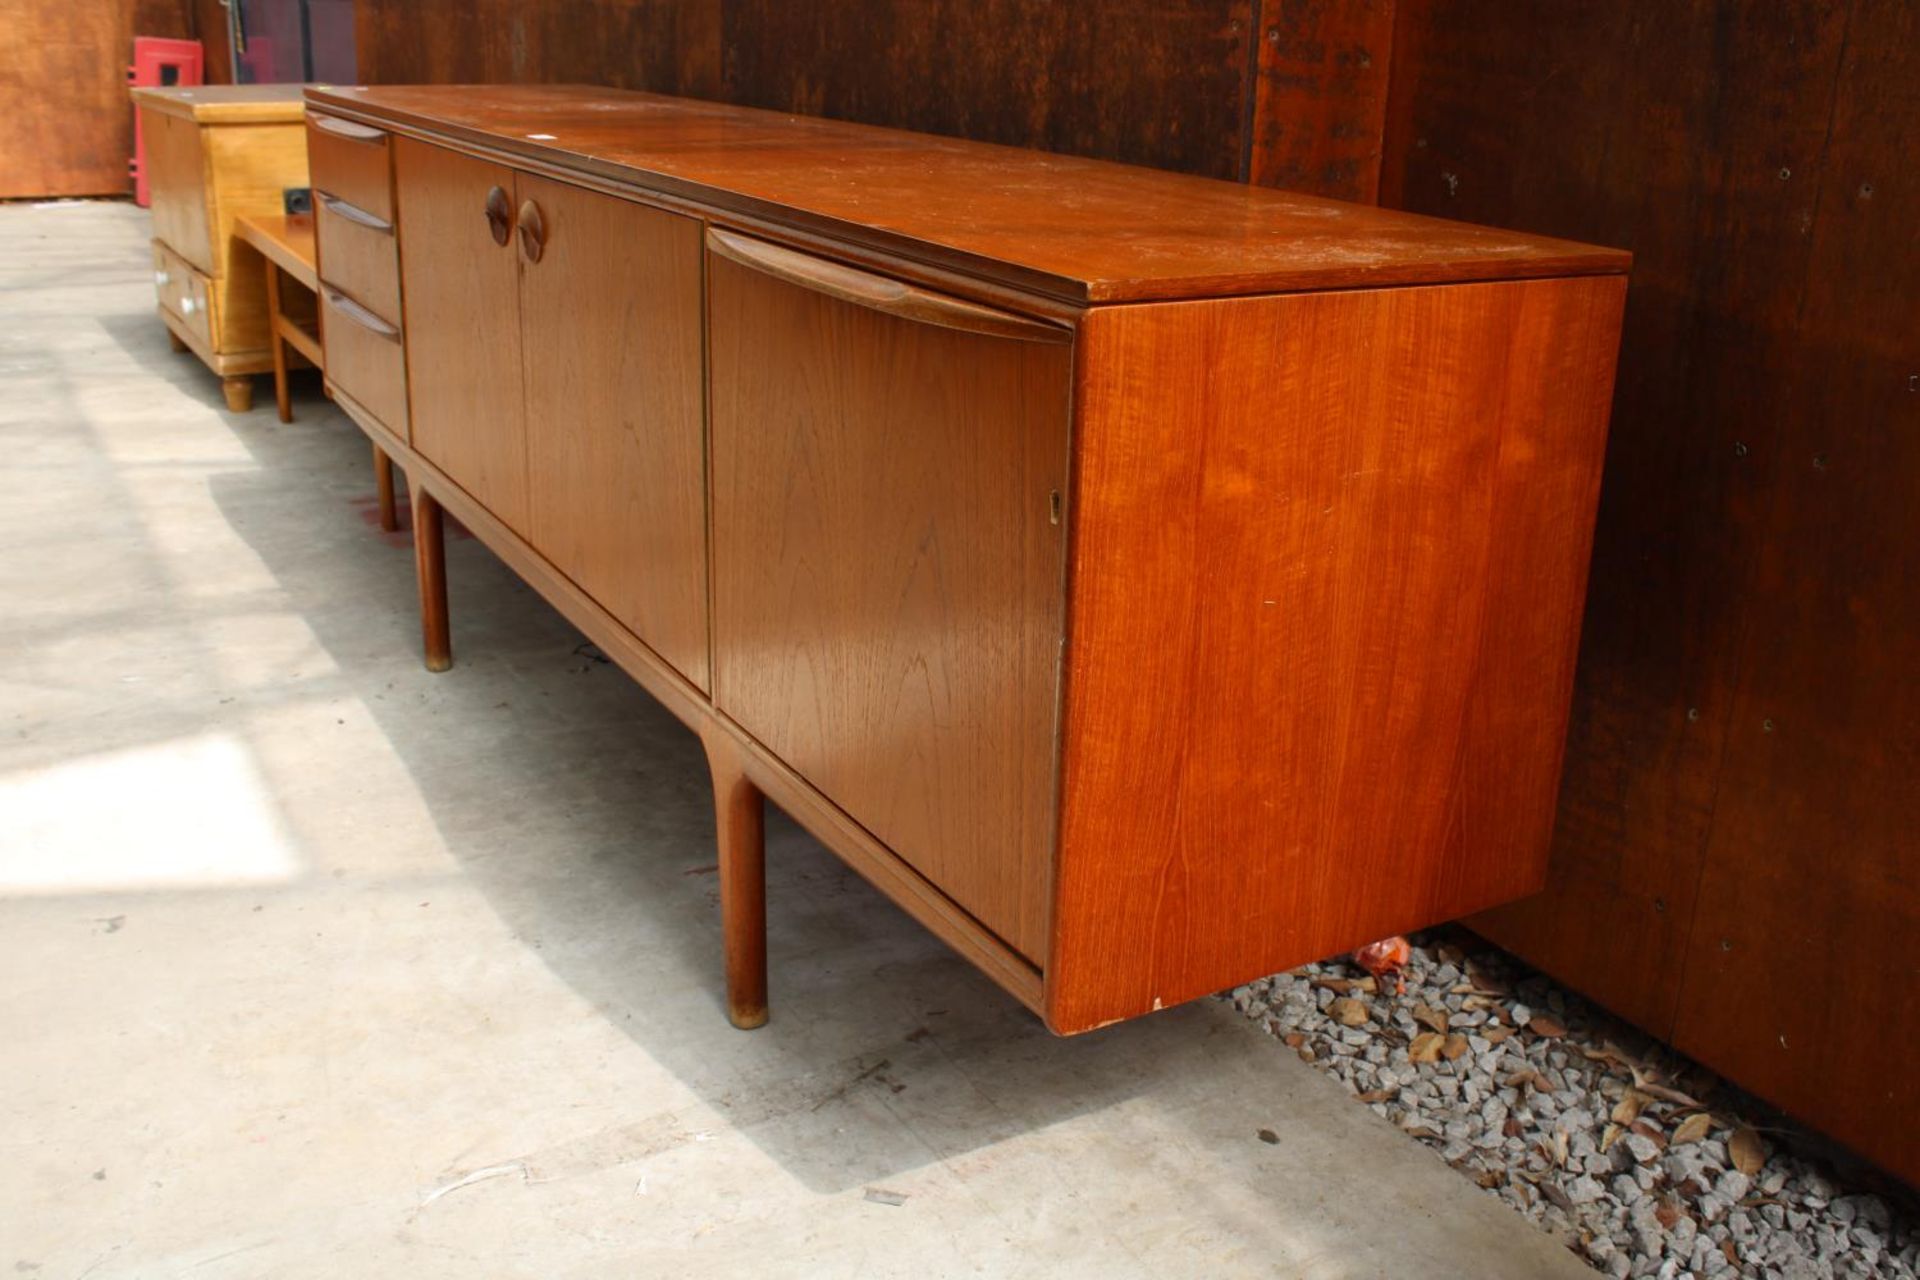 A McINTOSH RETRO TEAK SIDEBOARD ENCLOSING 3 DRAWERS AND 3 CUPBOARDS, 84" WIDE - Image 2 of 7